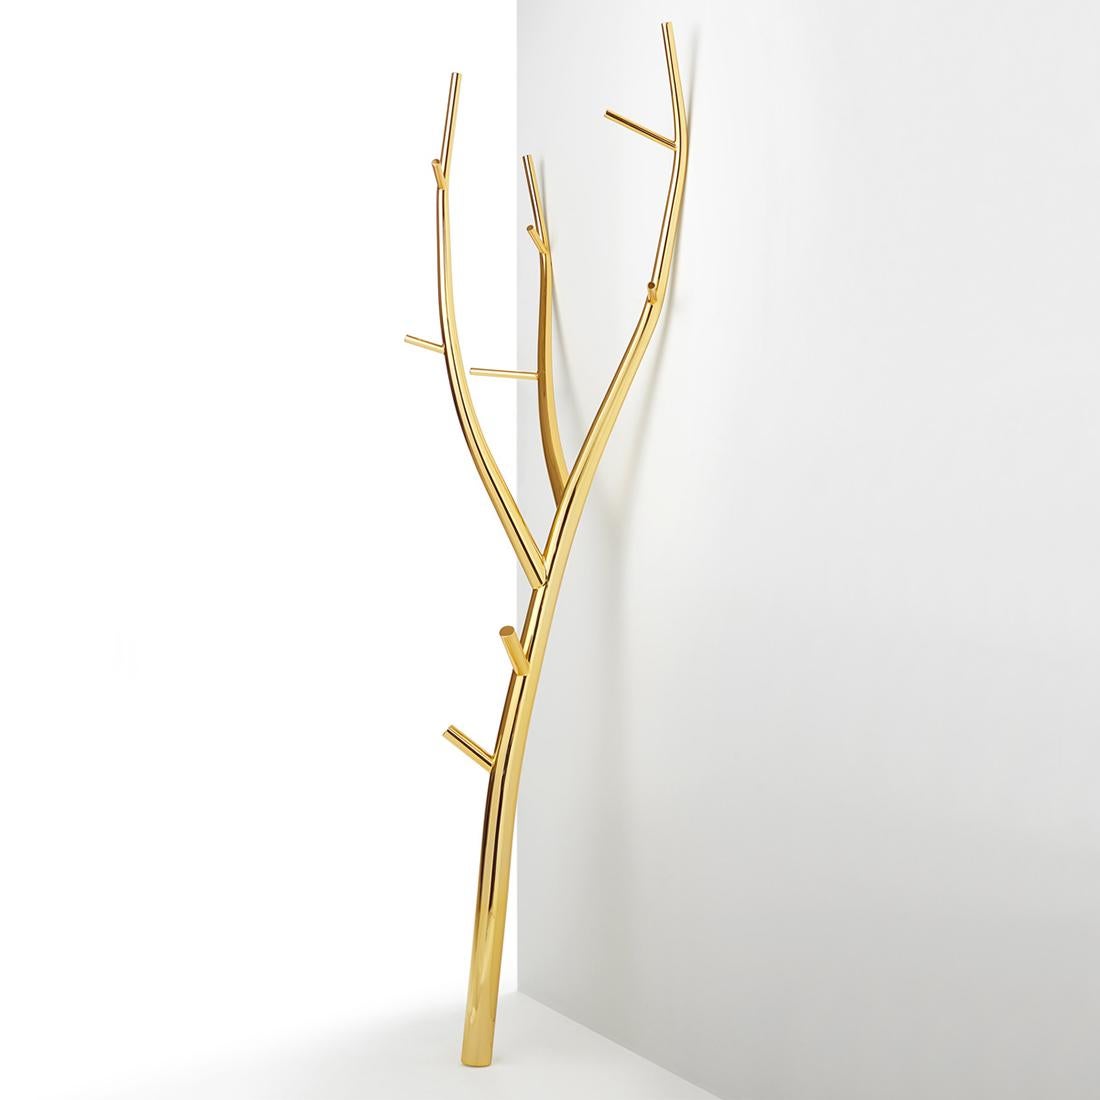 Coat rack branch gold 24-karat made with steel
structure gold plated in 24-karat. Must be wall
mounted. Price: 4250,00€.
Also available in:
Steel in lacquered matte white finish, price: 3900,00€.
Steel in oxidized finish, price: 4700,00€.
 